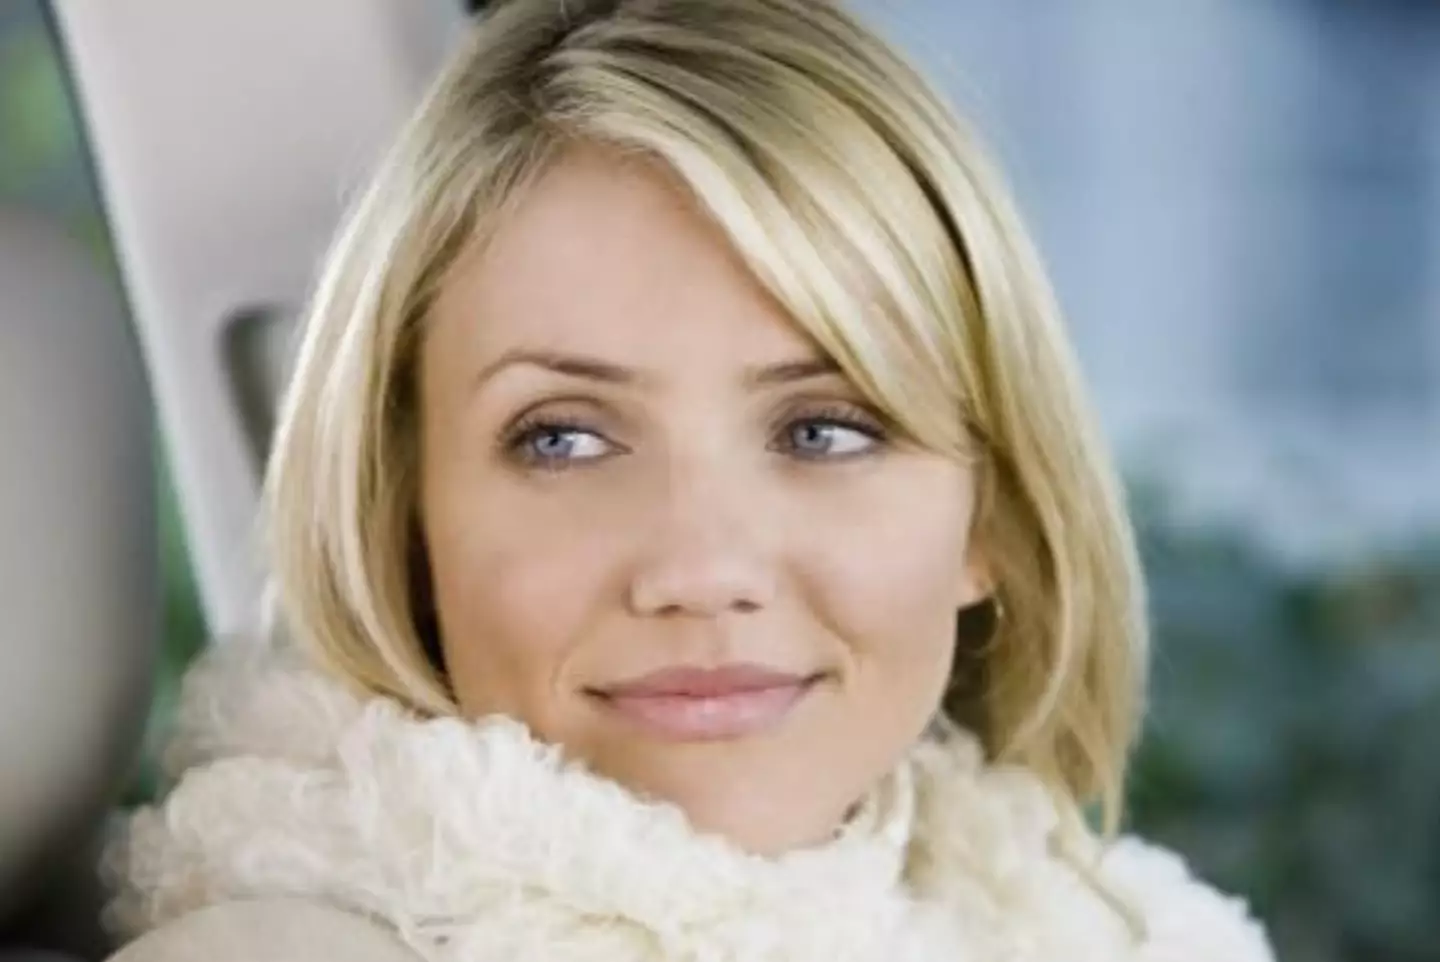 Cameron Diaz's character could have found herself a victim to a murder... though thankfully, she didn't!